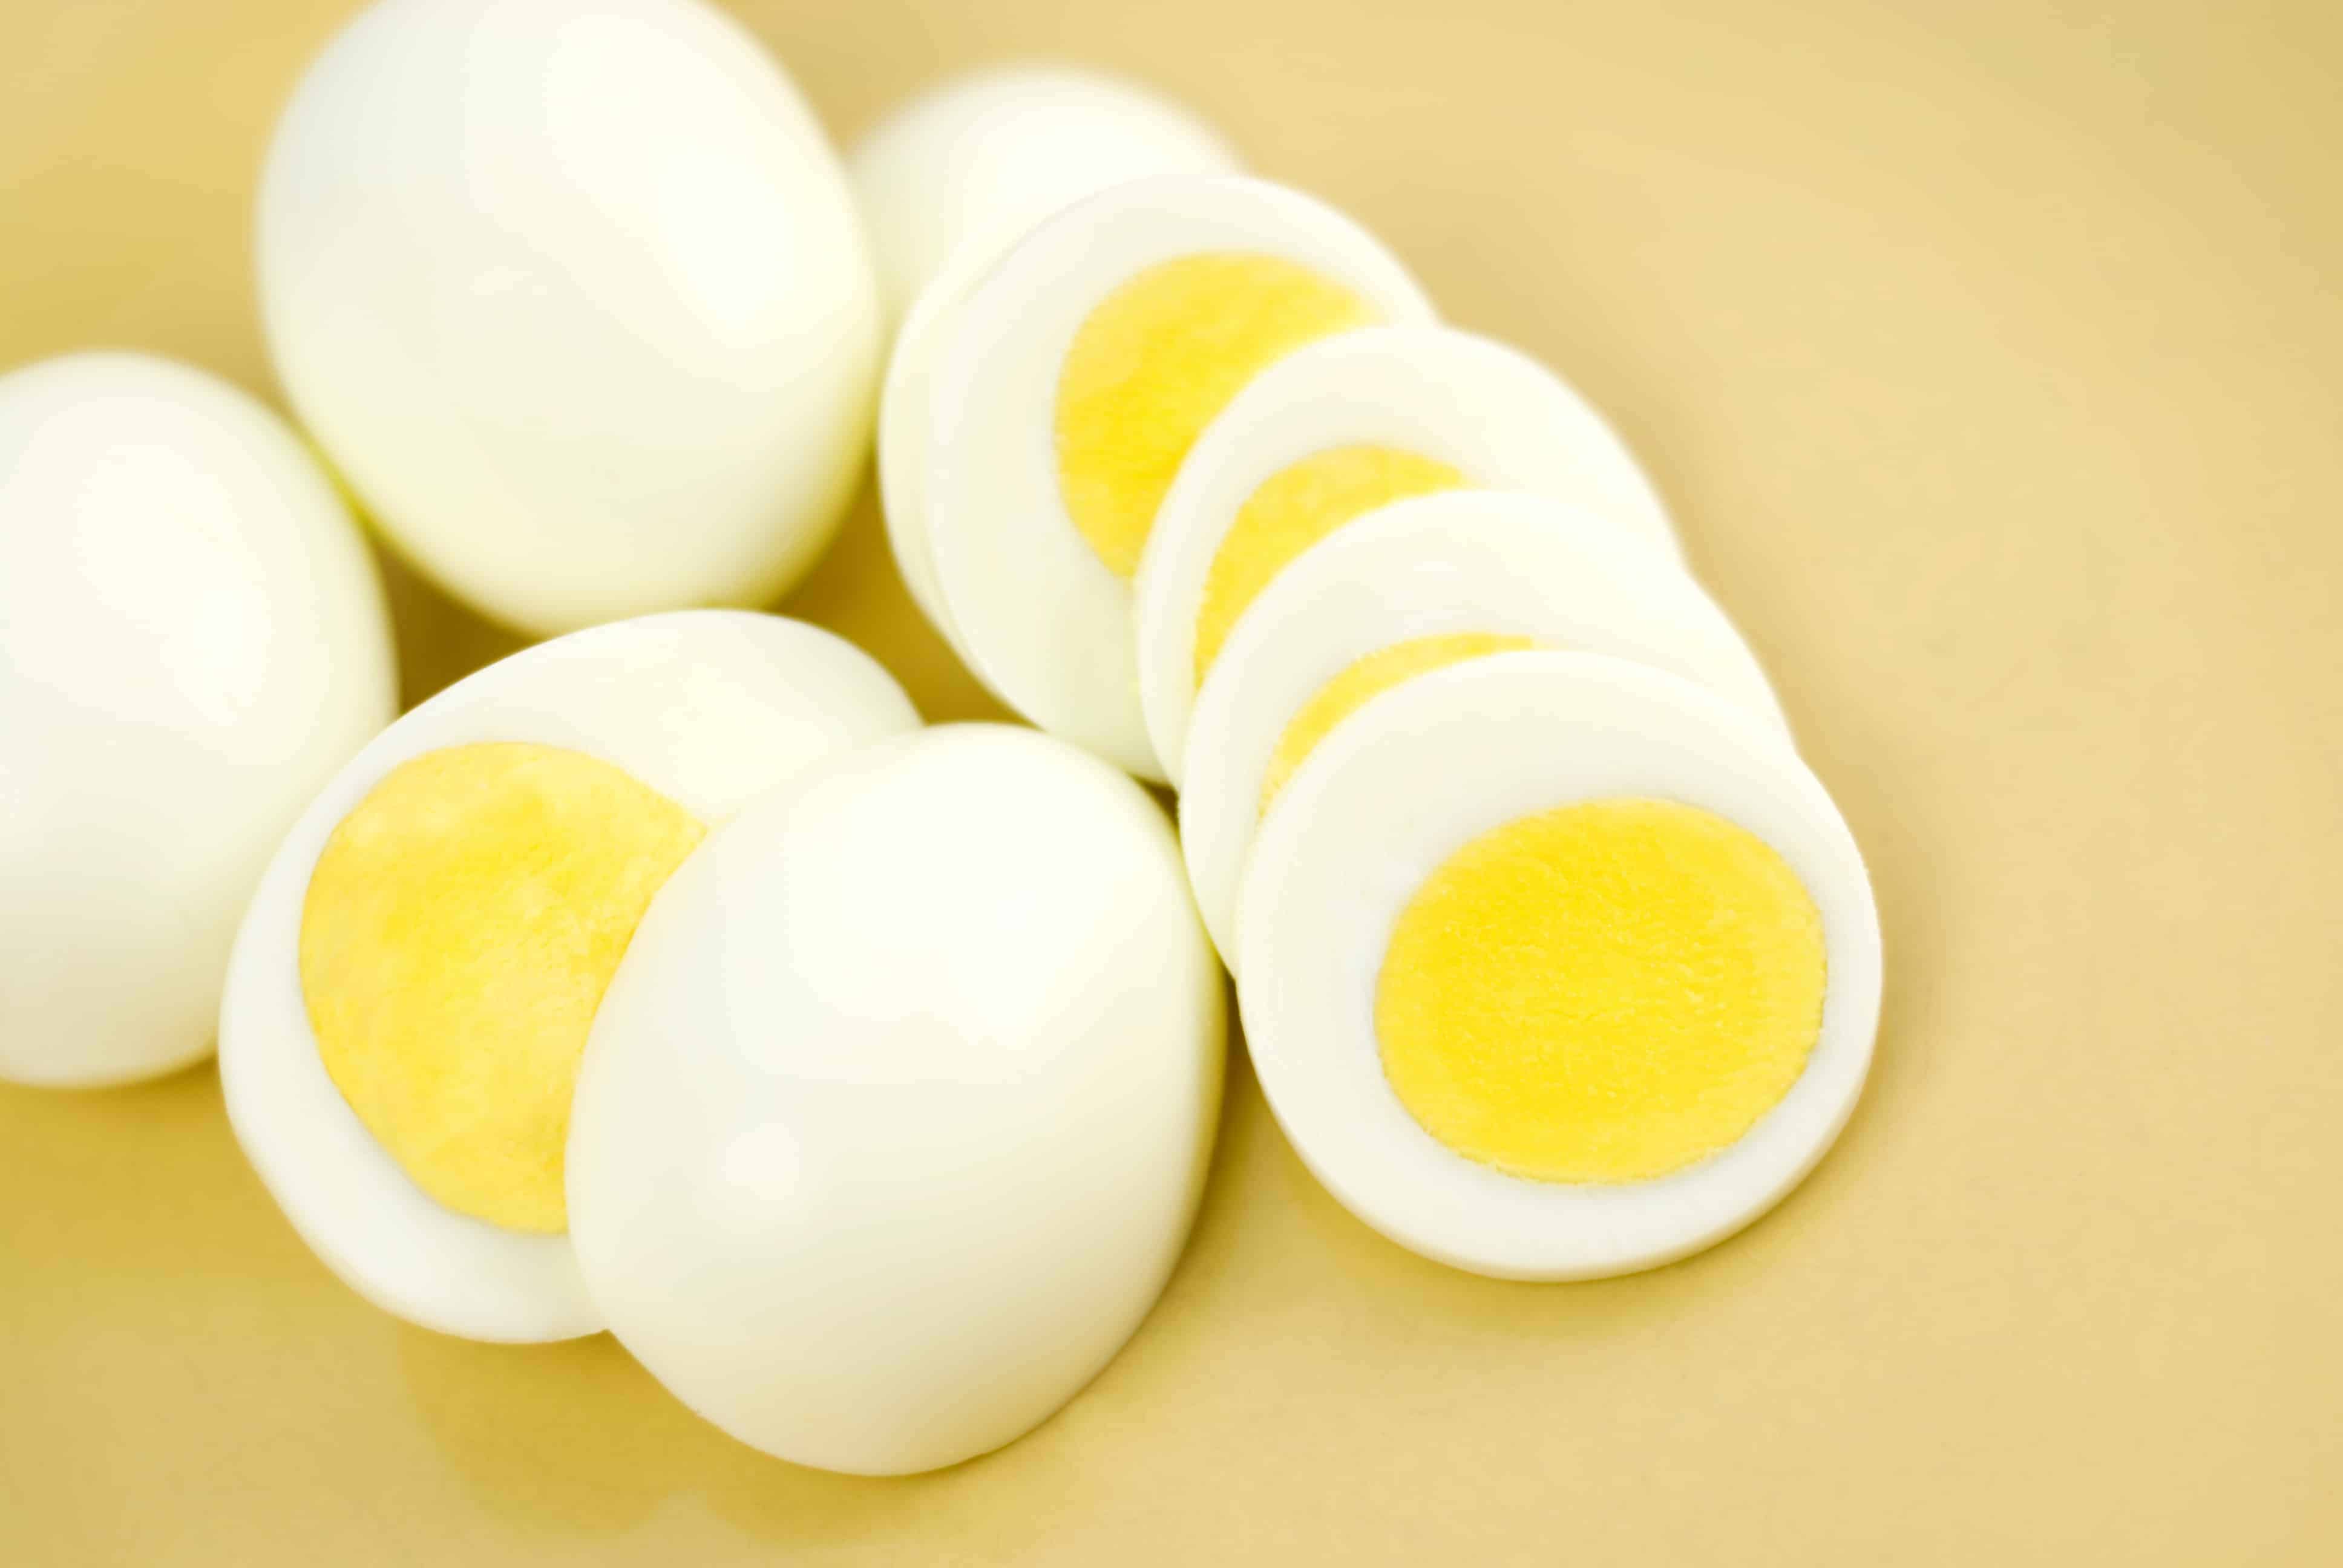 Perfect Hard Boiled Eggs Easily Steps On How To Hard Boil Eggs